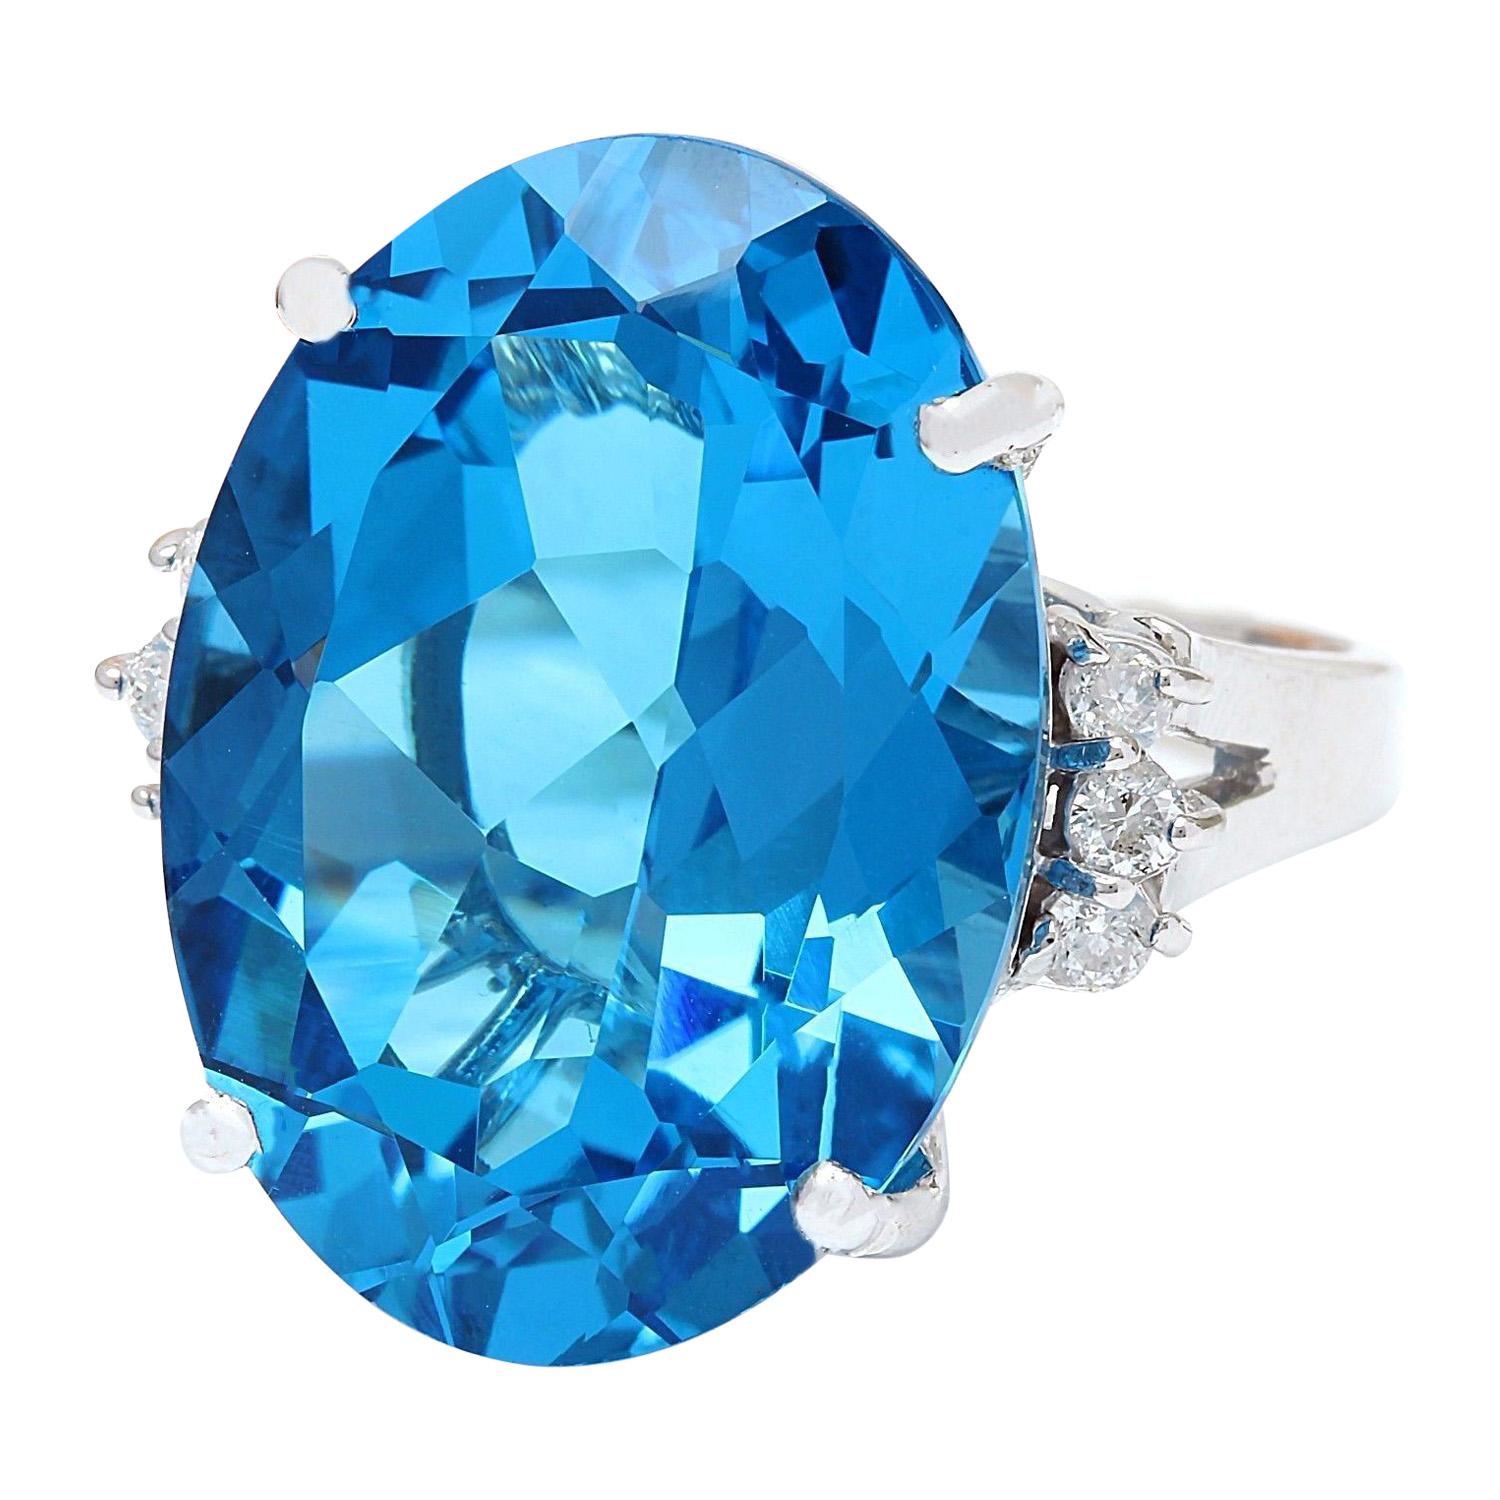 23.15 Carat Natural Topaz 14K Solid White Gold Diamond Ring
 Item Type: Ring
 Item Style: Cocktail
 Material: 14K White Gold
 Mainstone: Topaz
 Stone Color: Blue
 Stone Weight: 23.00 Carat
 Stone Shape: Oval
 Stone Quantity: 1
 Stone Dimensions: